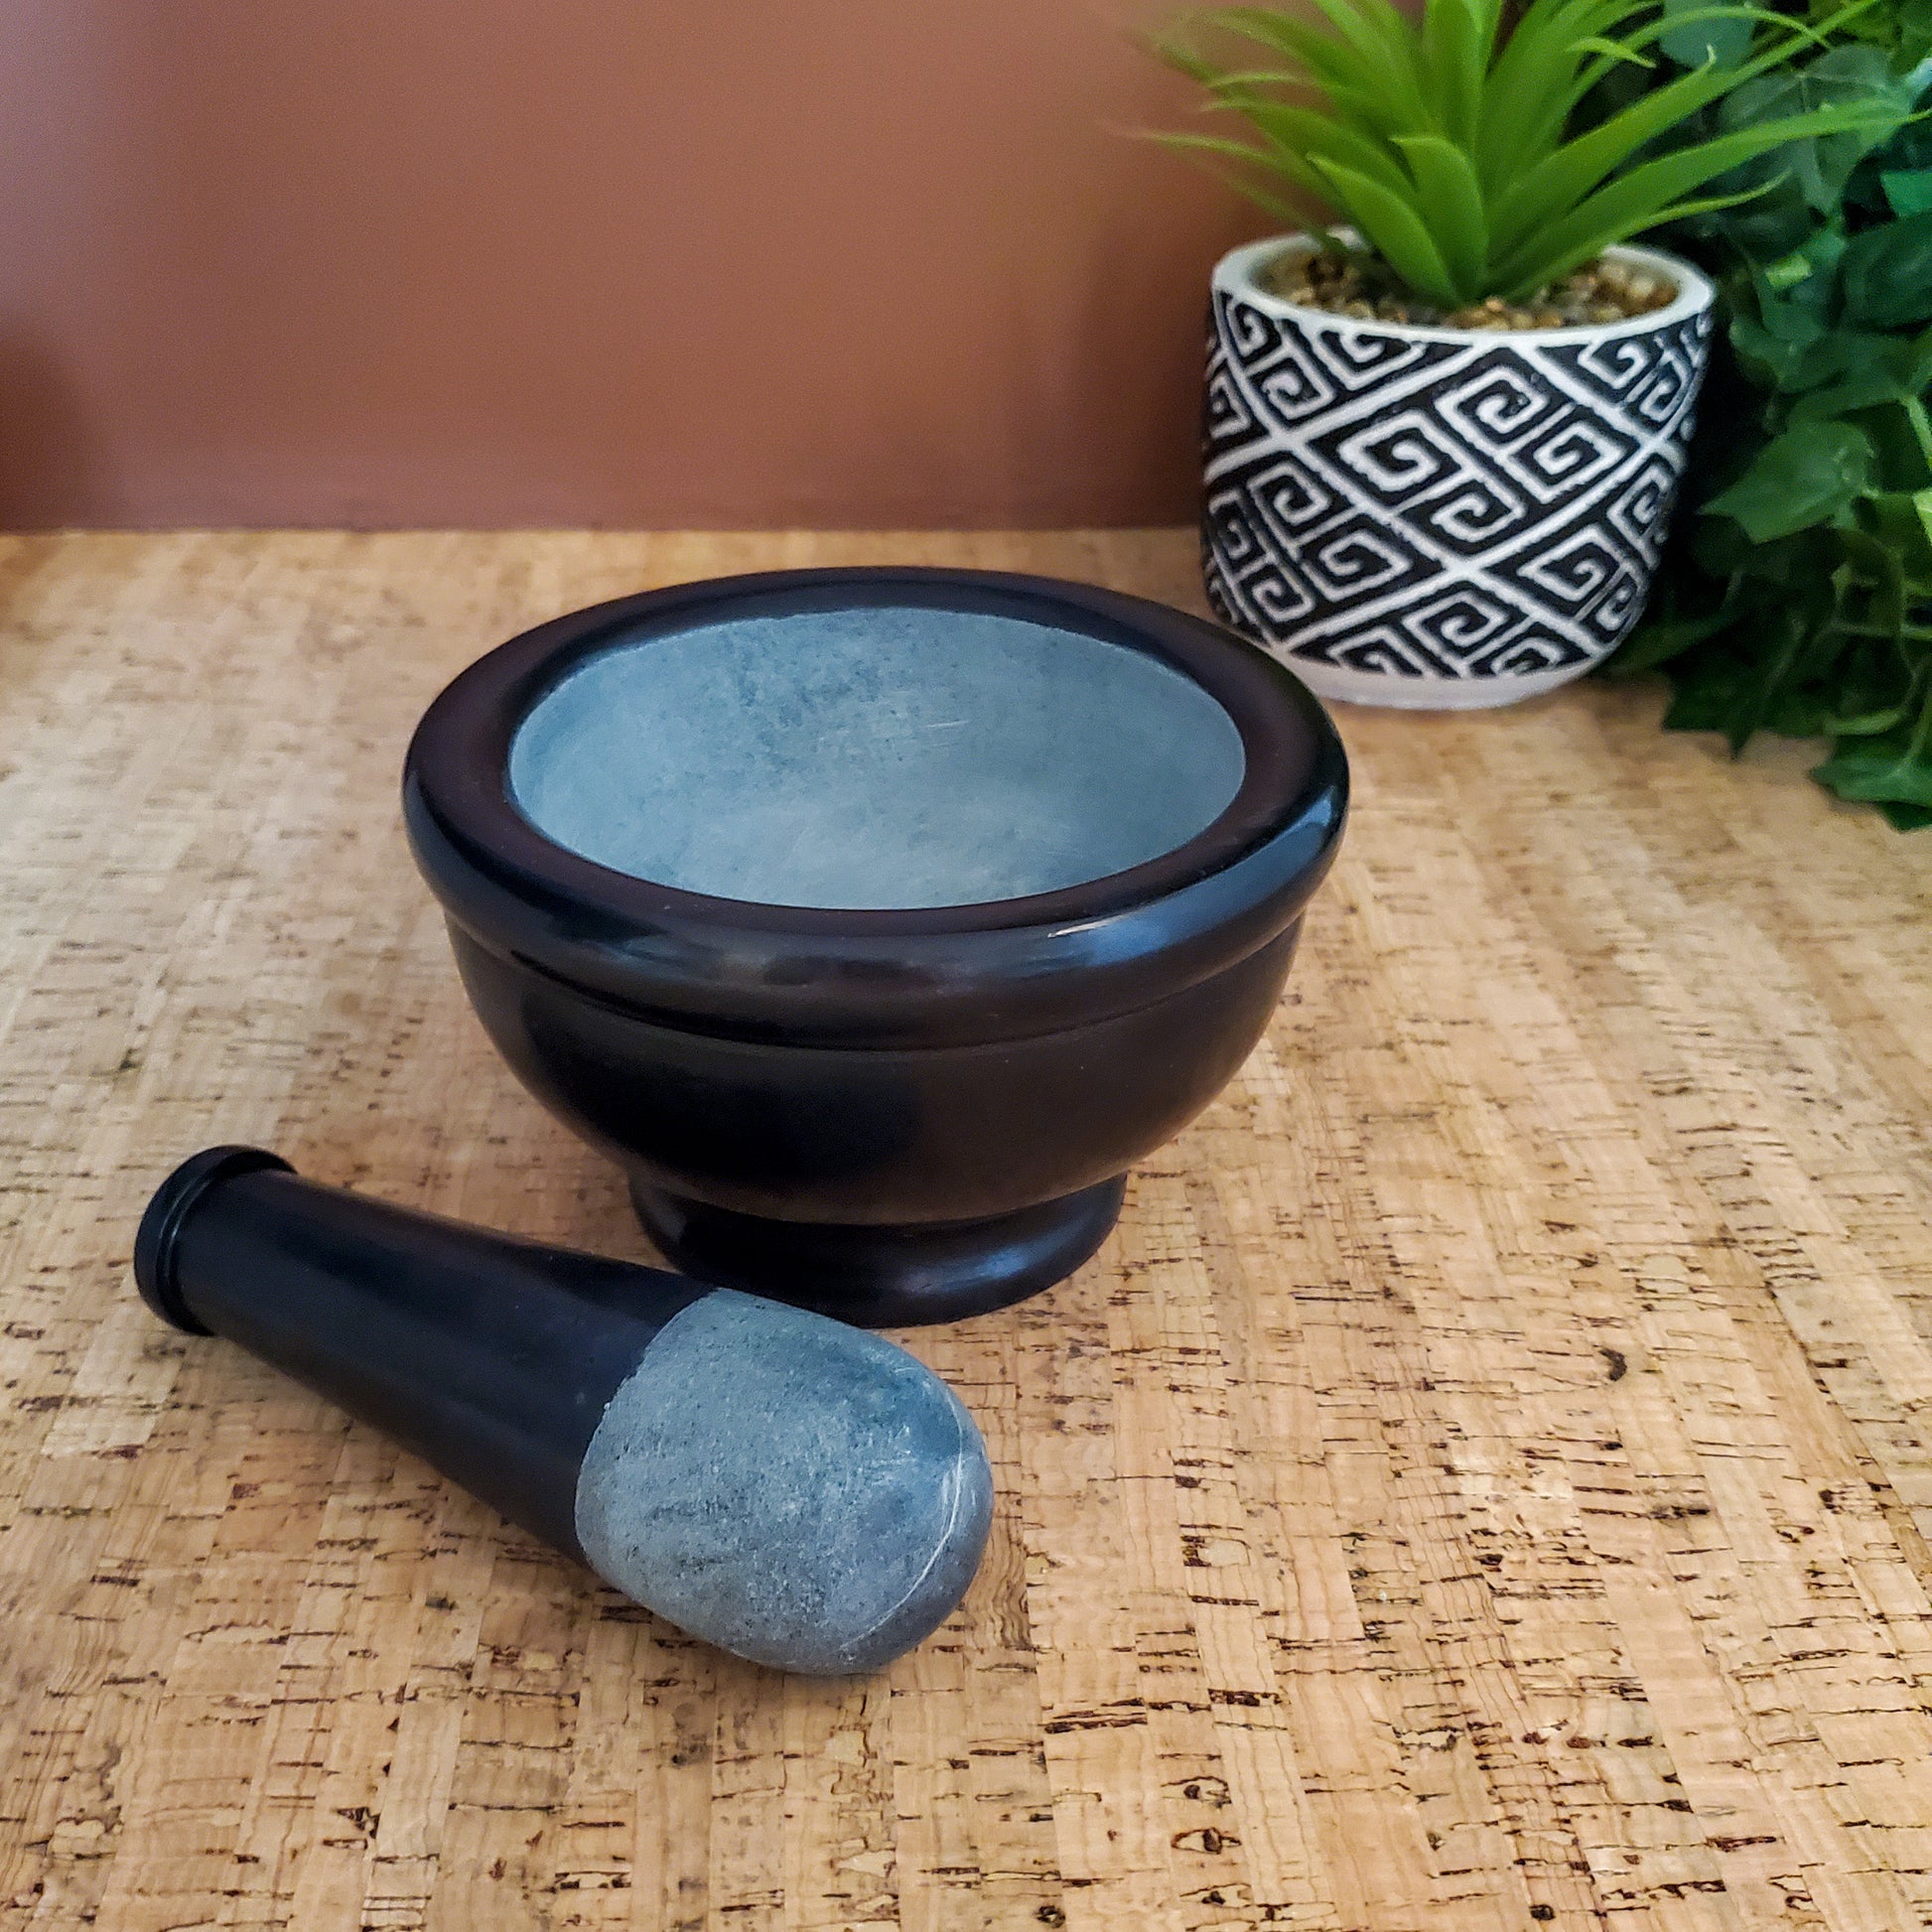 Green Marble Mortar and Pestle Set 5